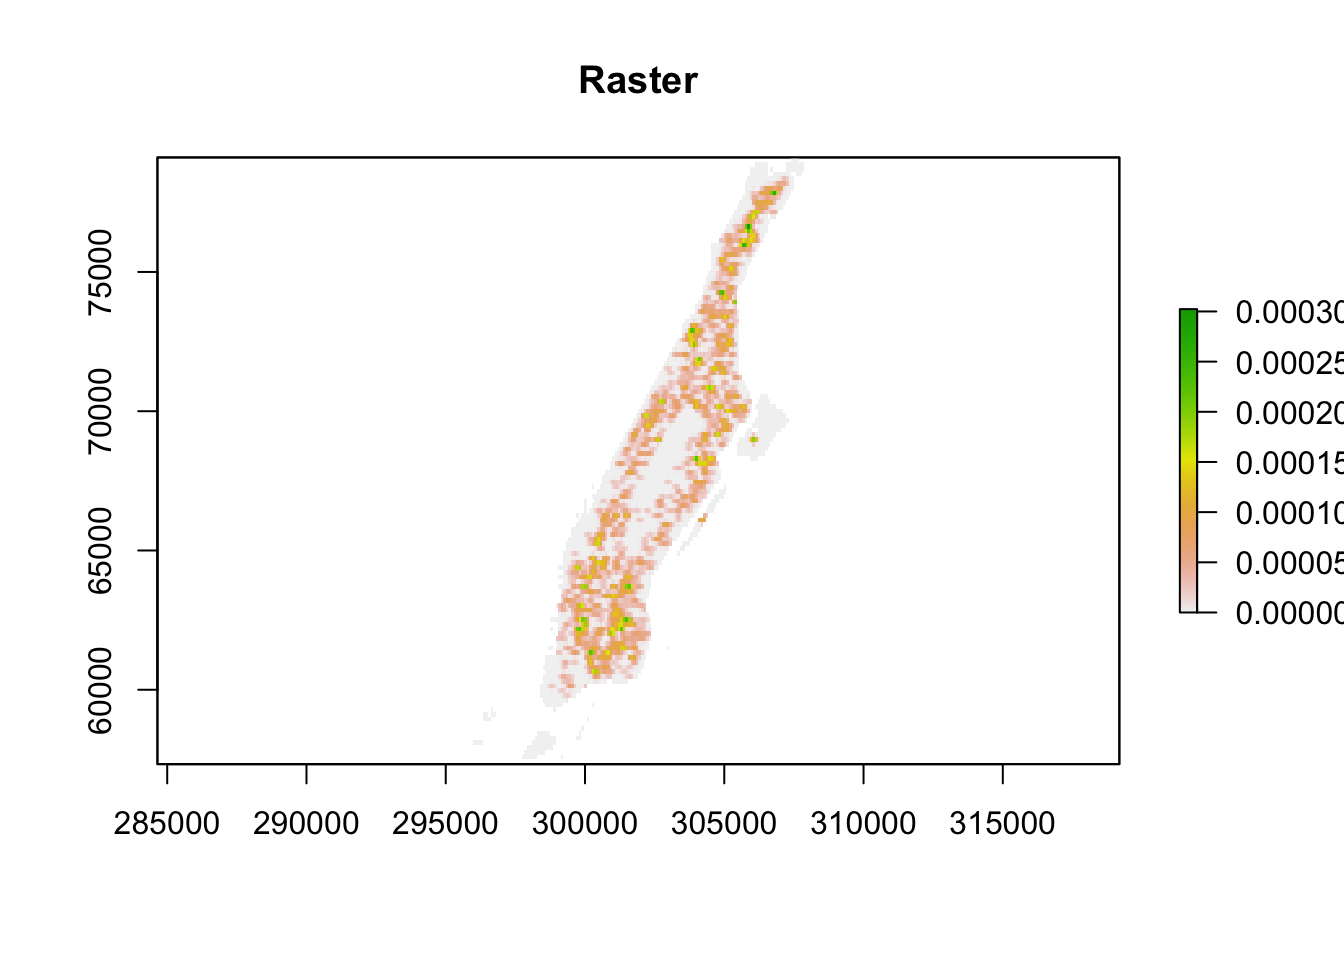 A different looking shaded map of Manchester, titled 'Raster'. The landmass is shaded light grey, and large numbers appear on notches on the vertical and horizontal axis. A legend to the right increases from zero as grey or transparent, then orange, then yellow, and finally green for the largest values. The blotchy shading on the map is familiar by now, with Central Park being avoided, and most of the island shaded orange, with some green appearing.